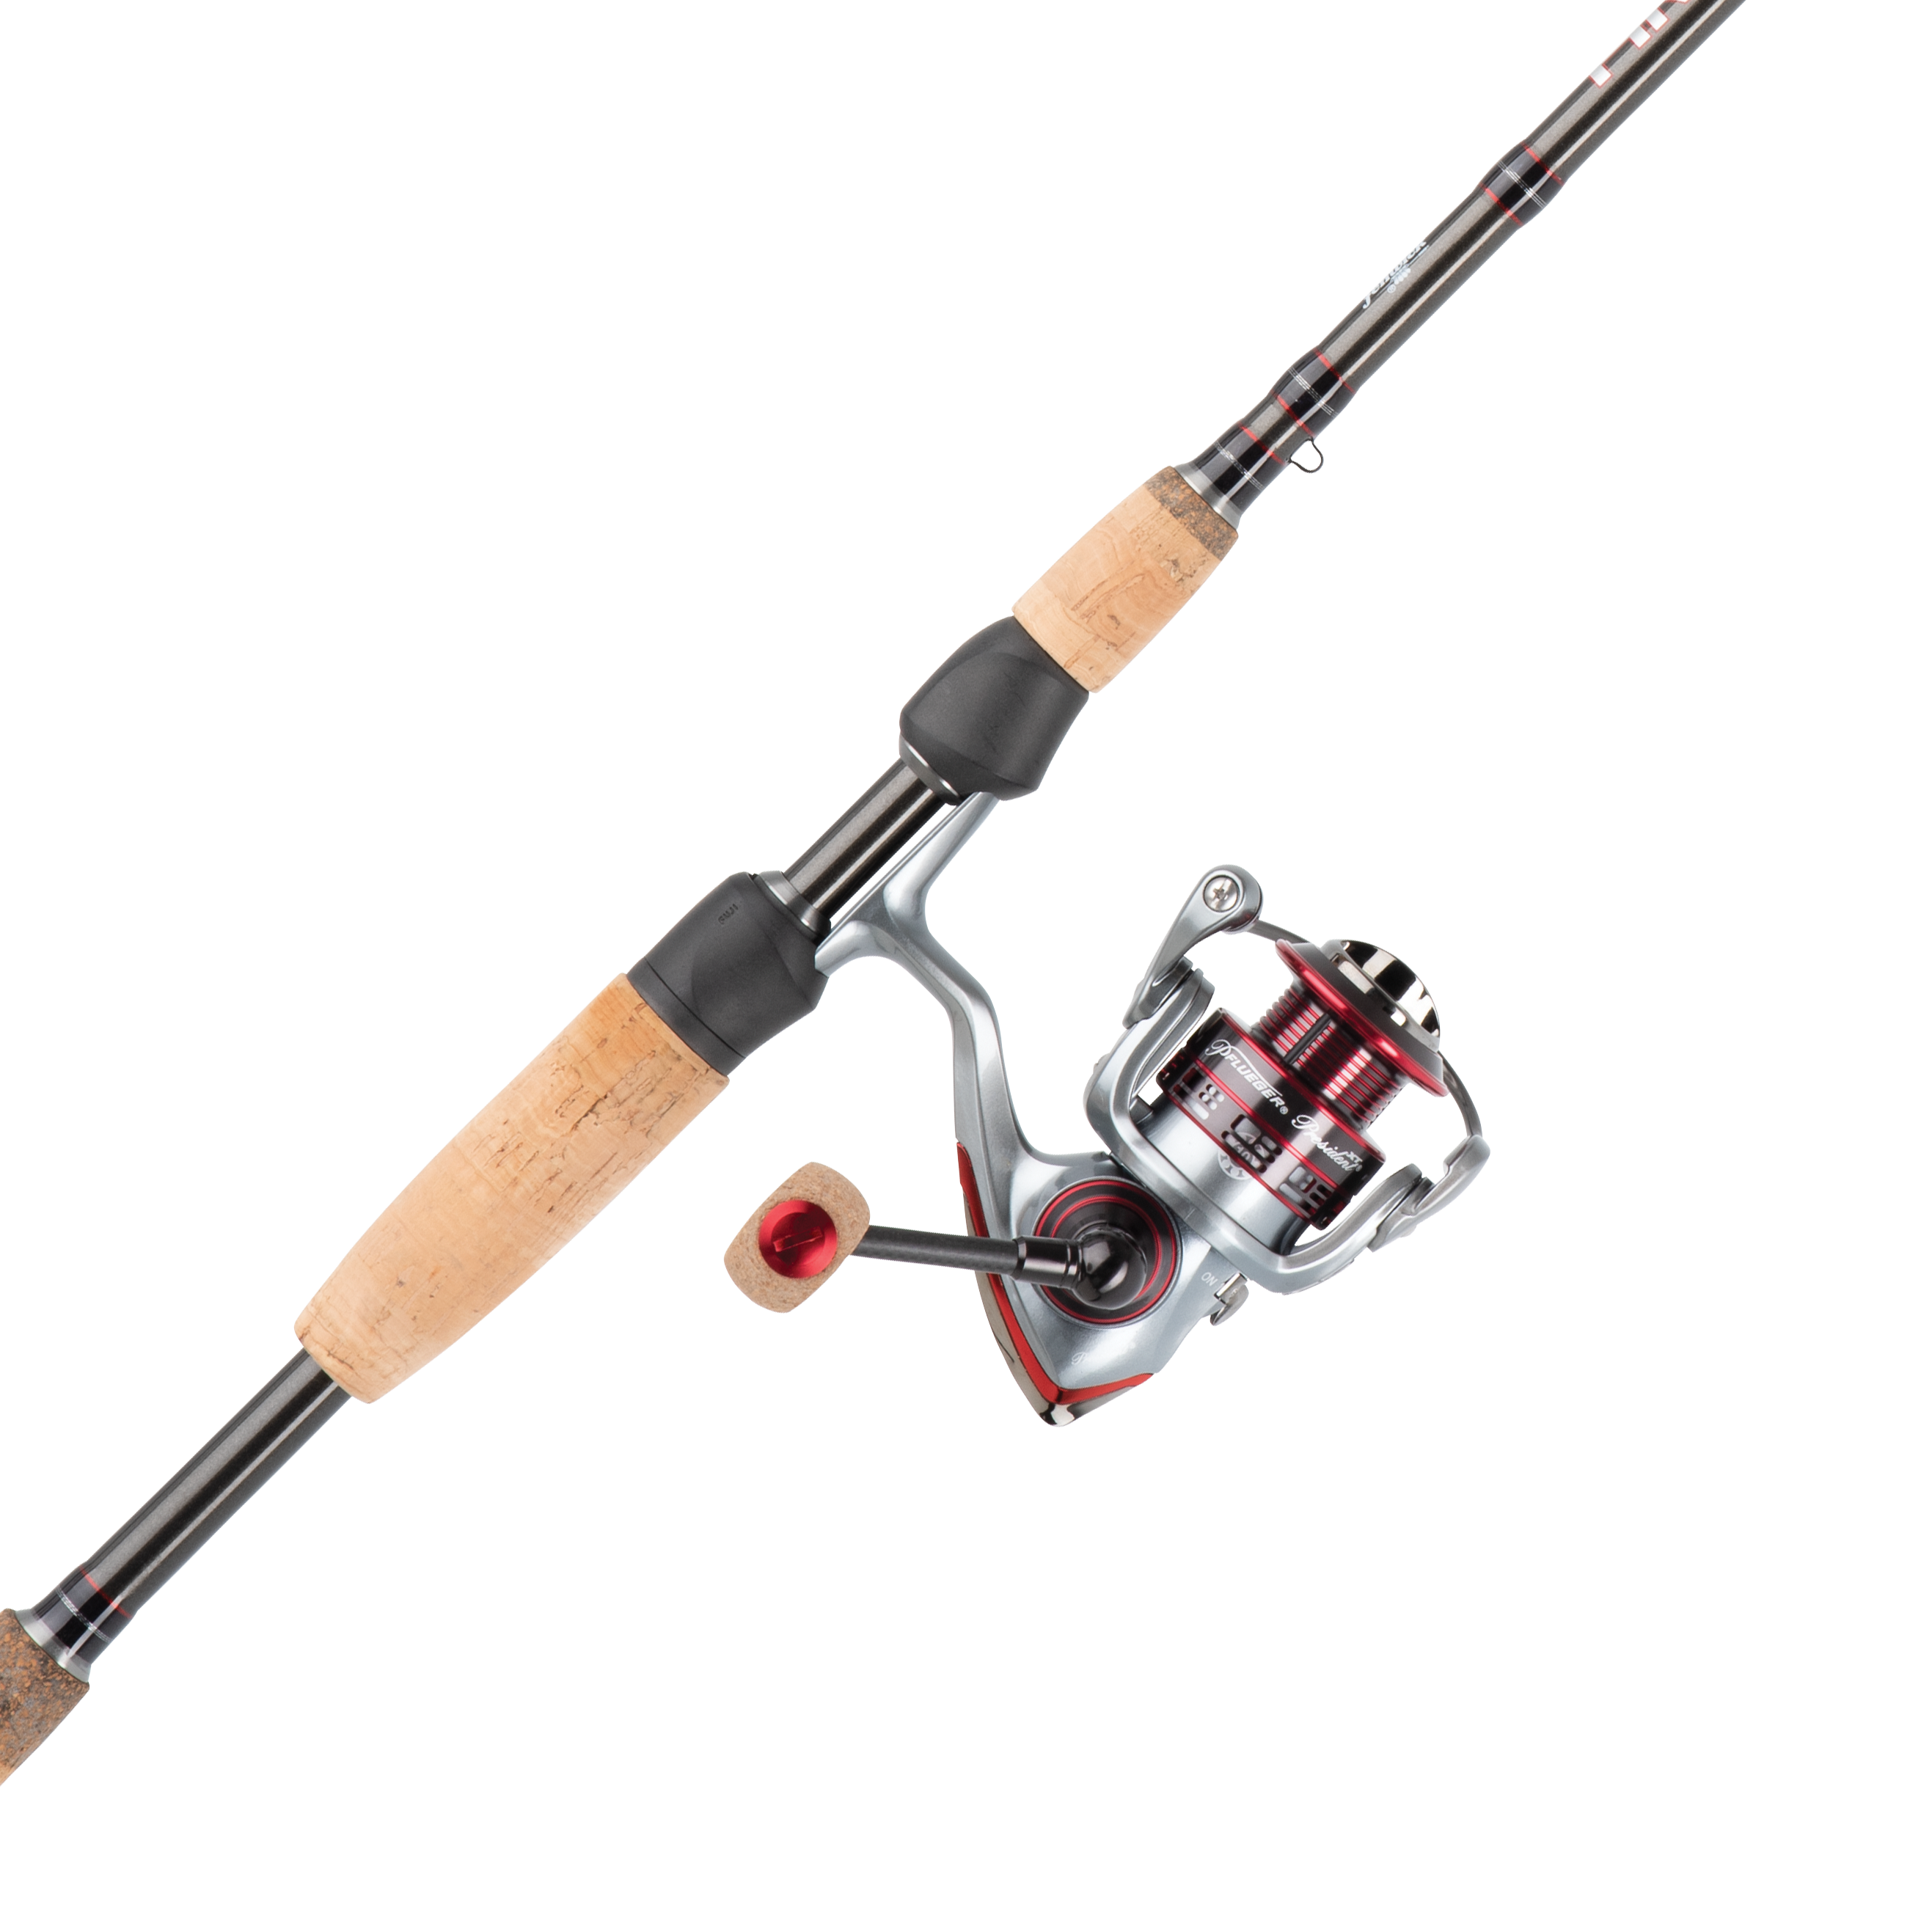 Purchased a Pflueger President Spinning combo- the site said rod